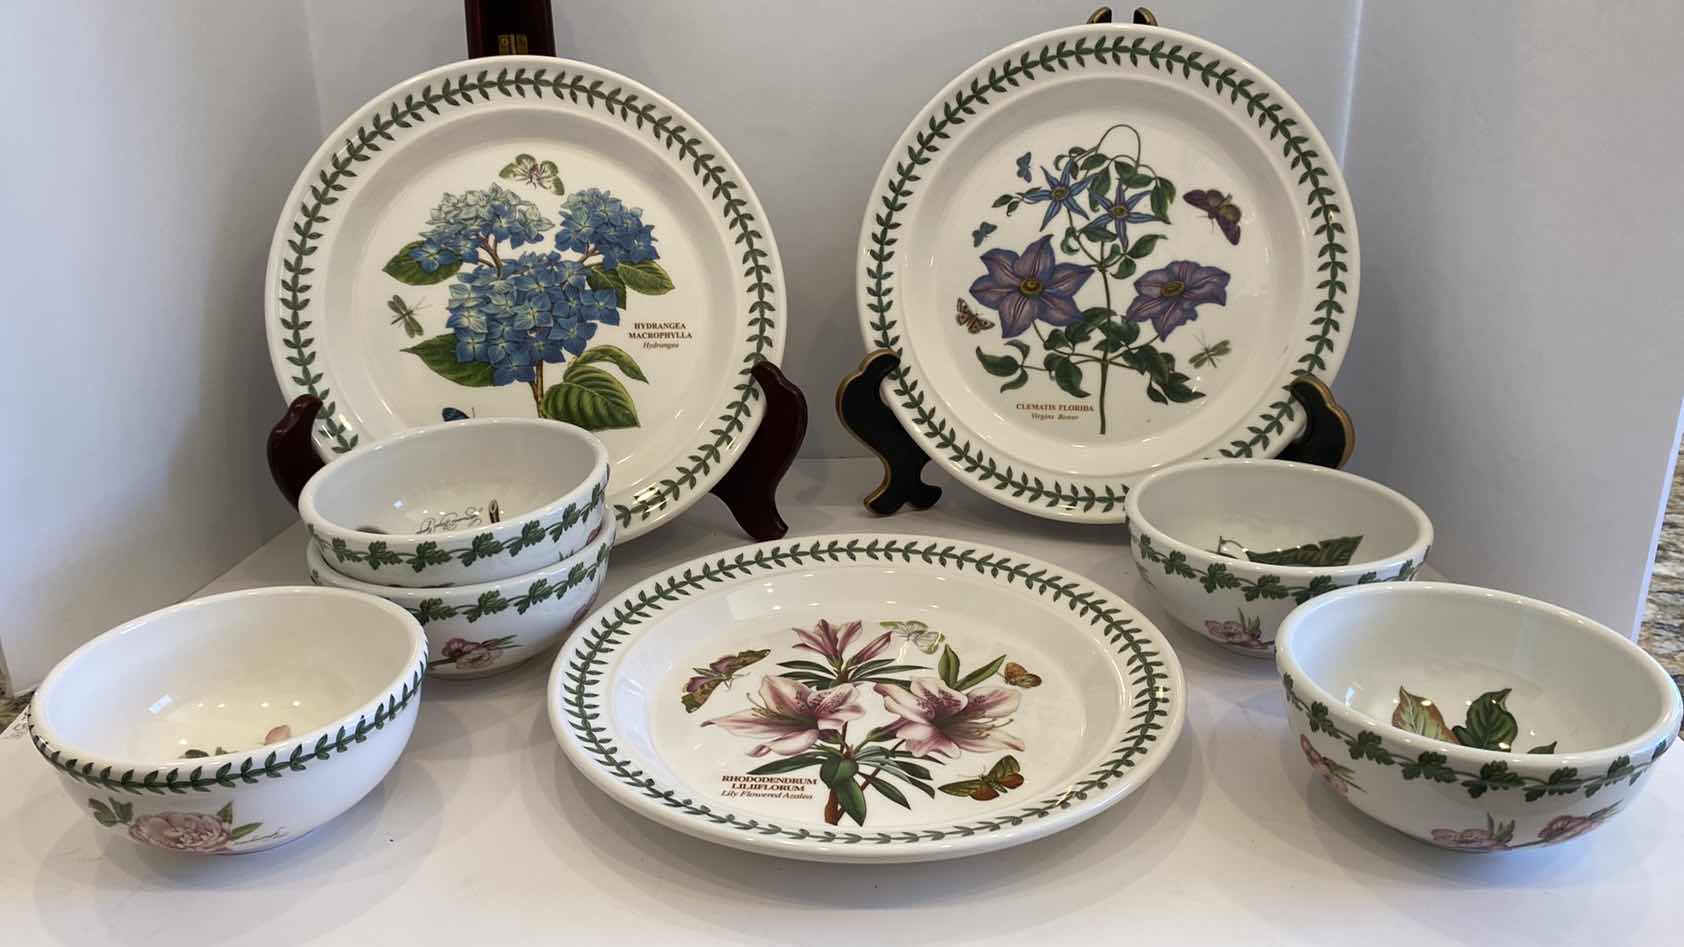 Photo 1 of POMONA PORT MADE IN ENGLAND CEREAL BOWLS AND BOTANIC GARDEN PLATES BY SUSAN WILLIAMS ELLIS